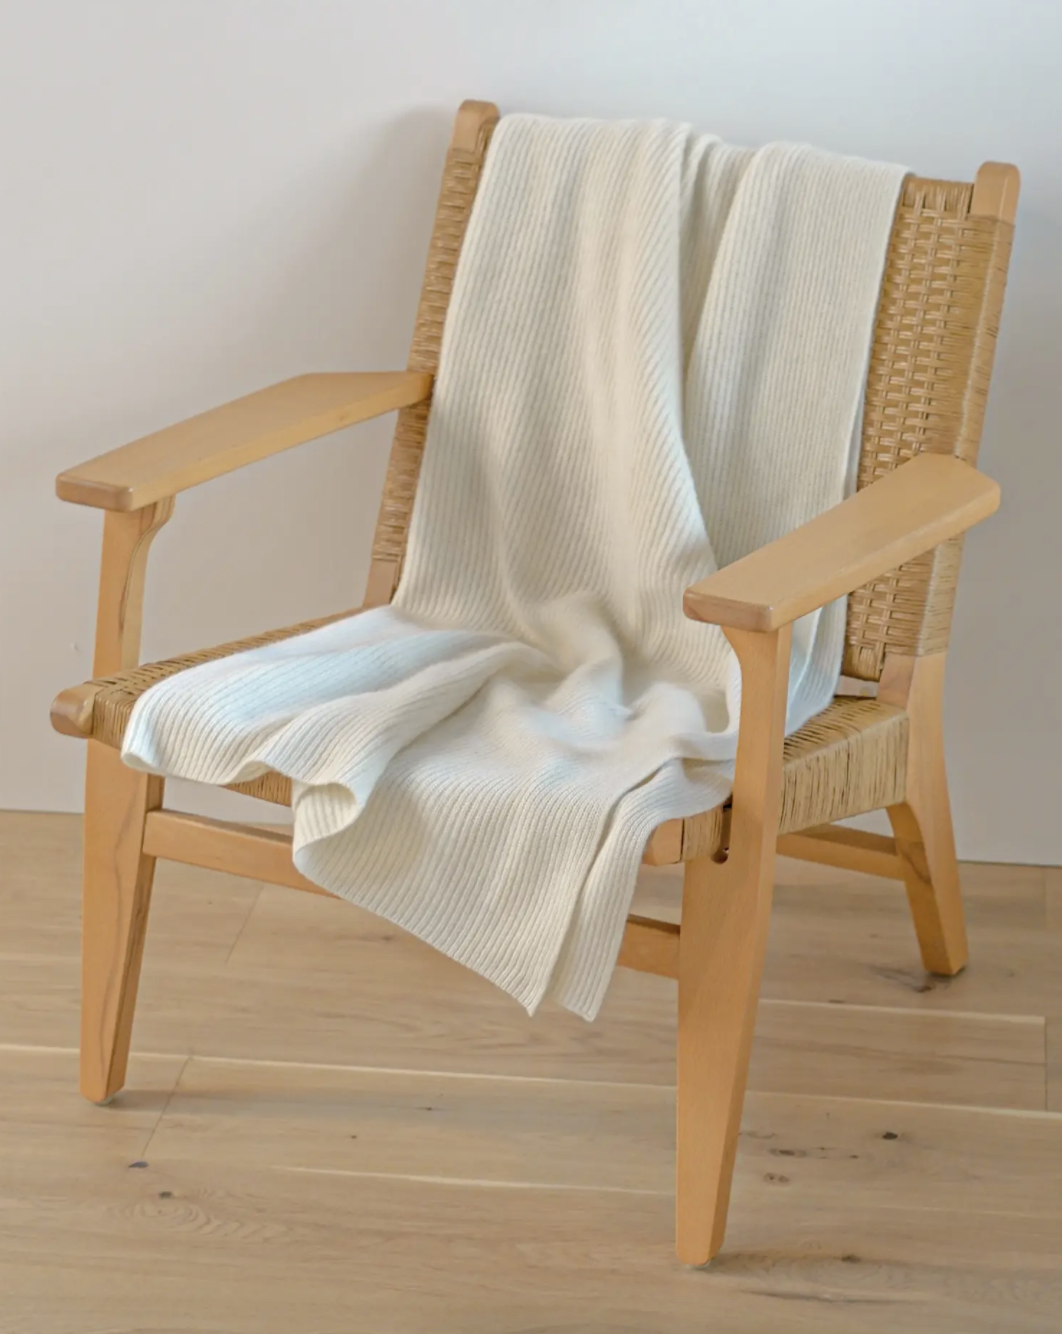 cream-colored cashmere throw on a wooden armchair